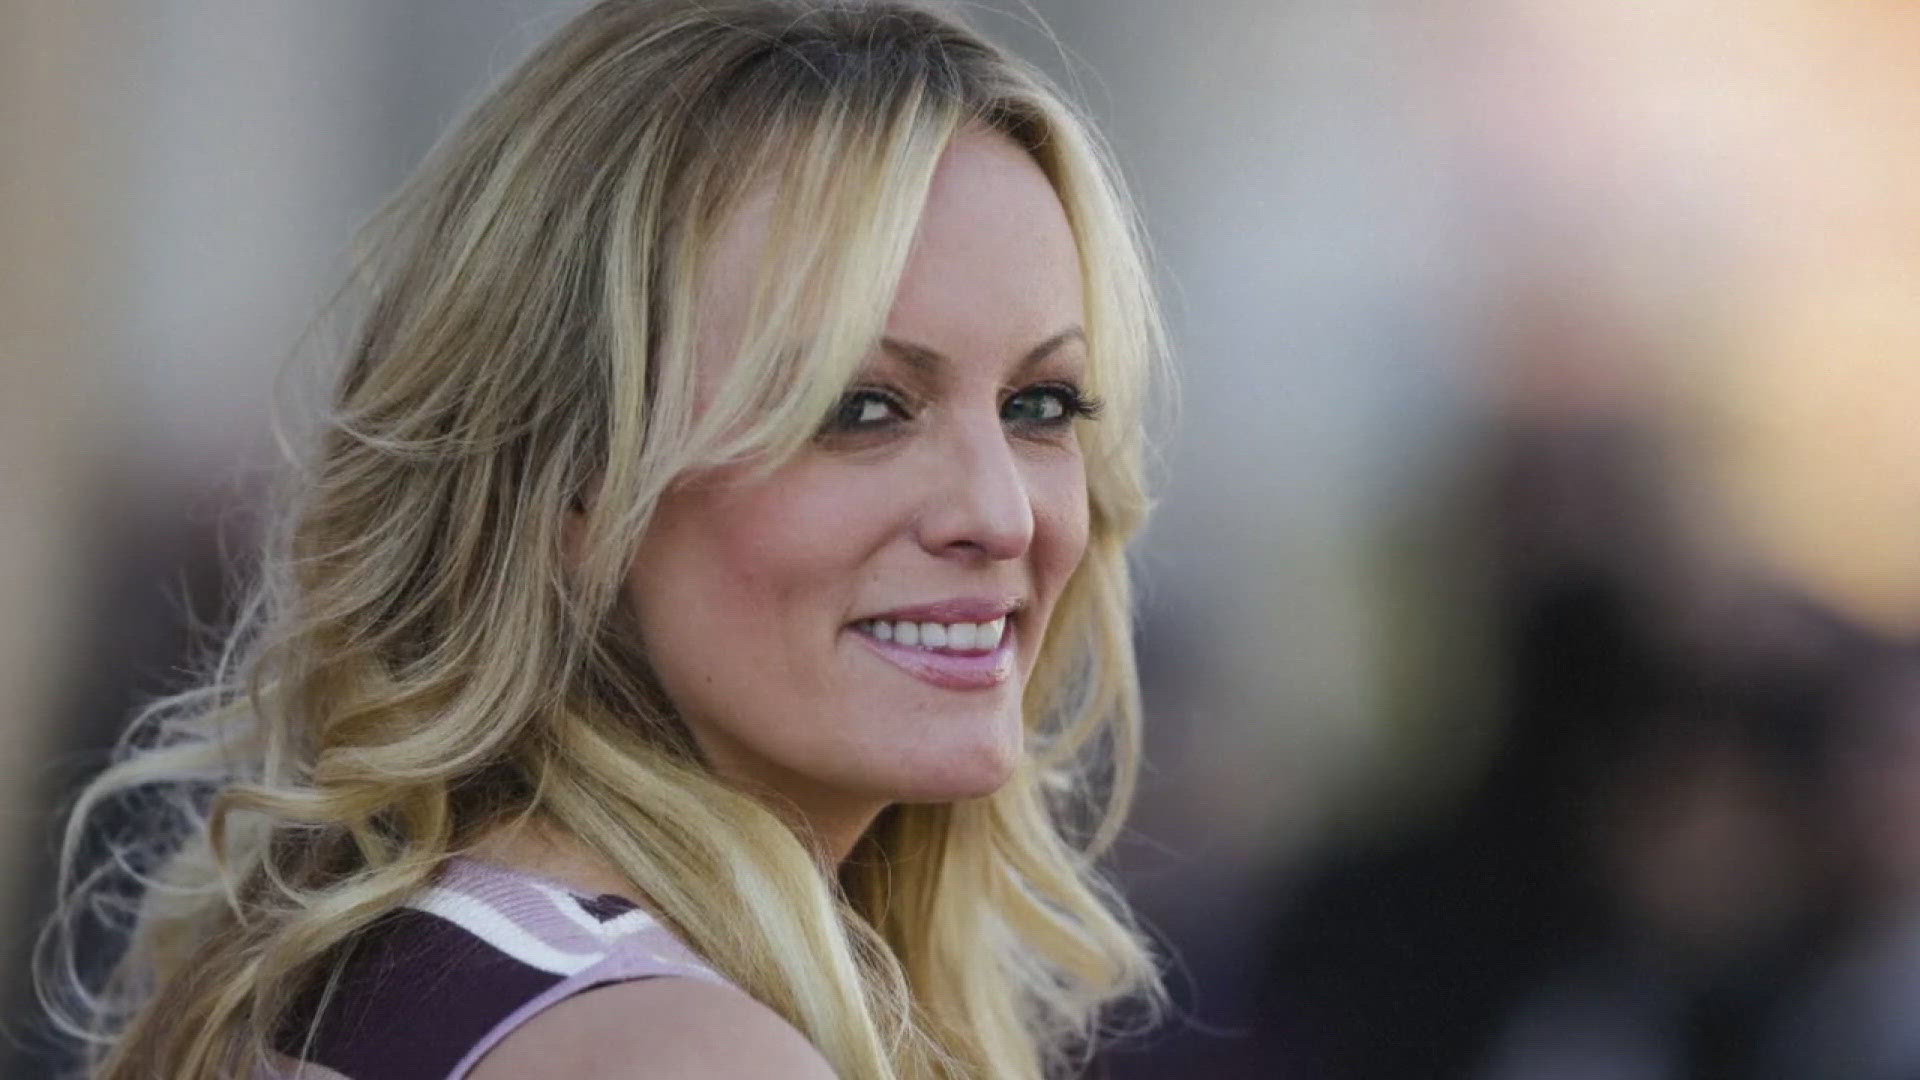 Former President Trump comes face to face with adult film actress Stormy Daniels as she testifies in his criminal trial.